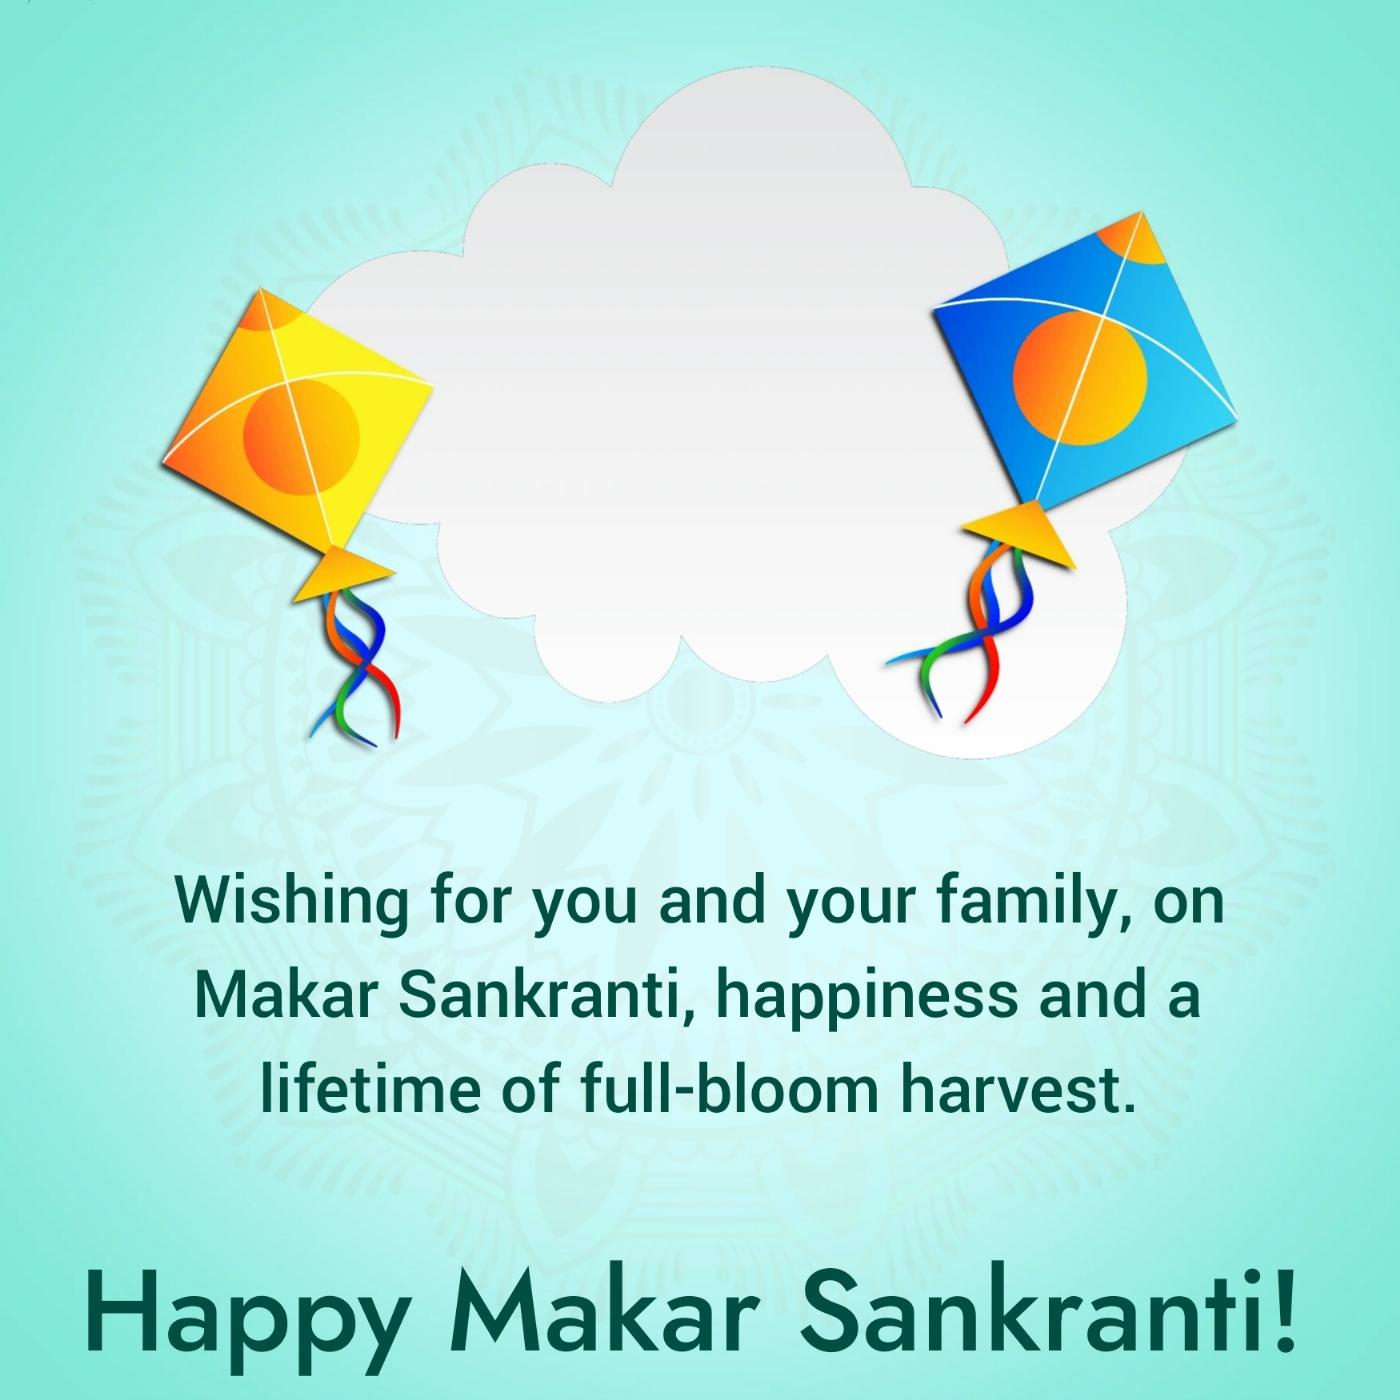 Wishing for you and your family on Makar Sankranti